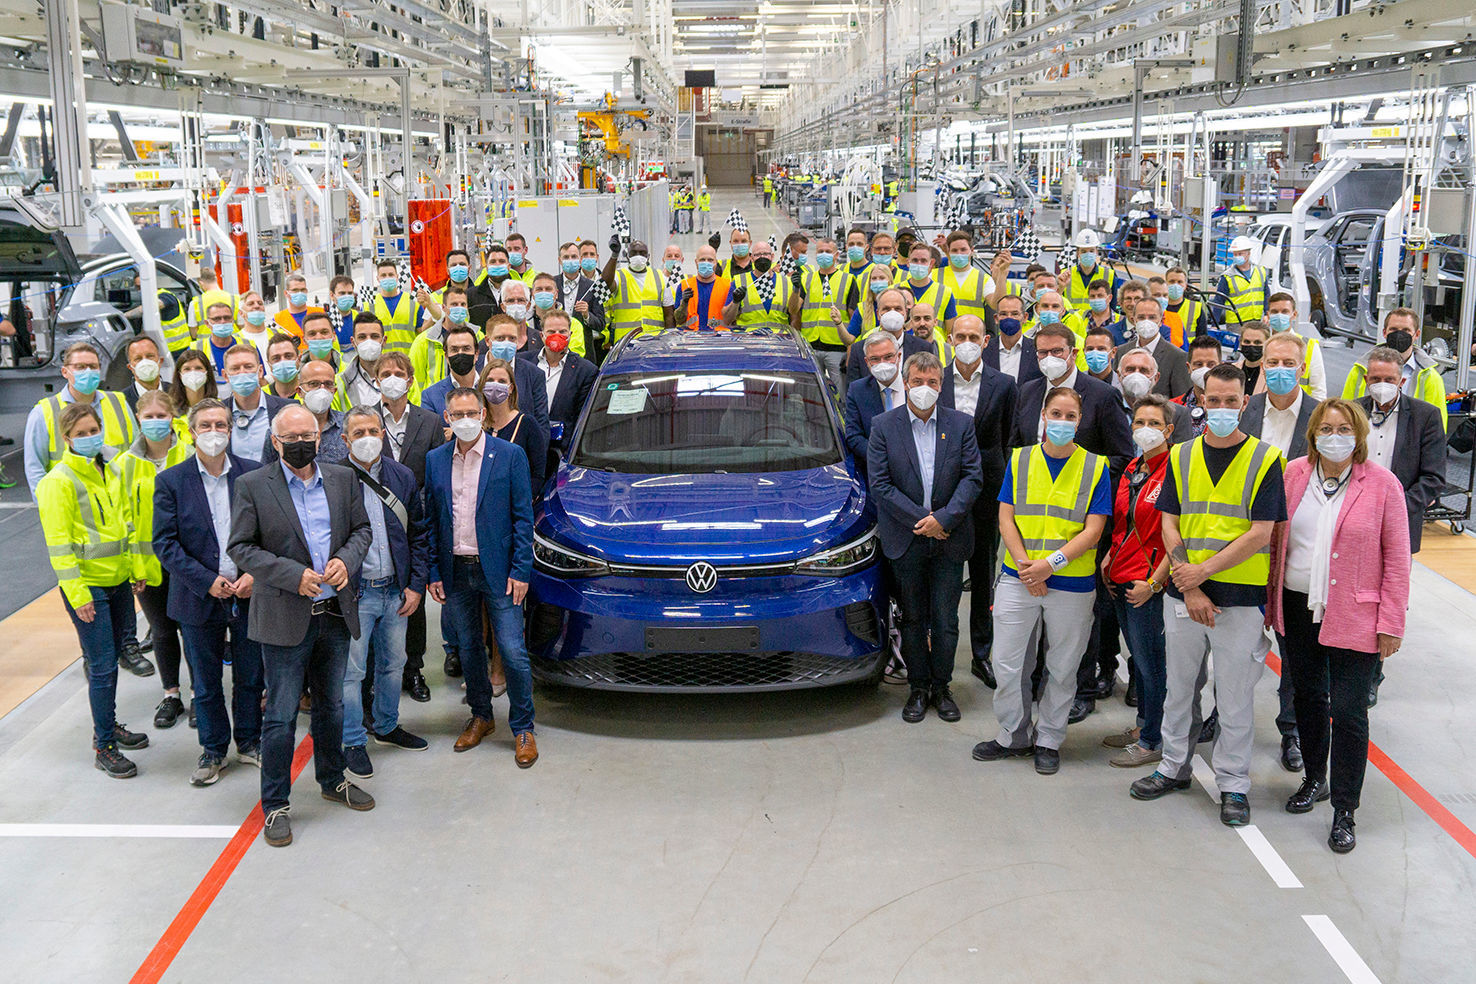 Volkswagen’s global production network for electric vehicles grows with the launch of a second German site in Emden